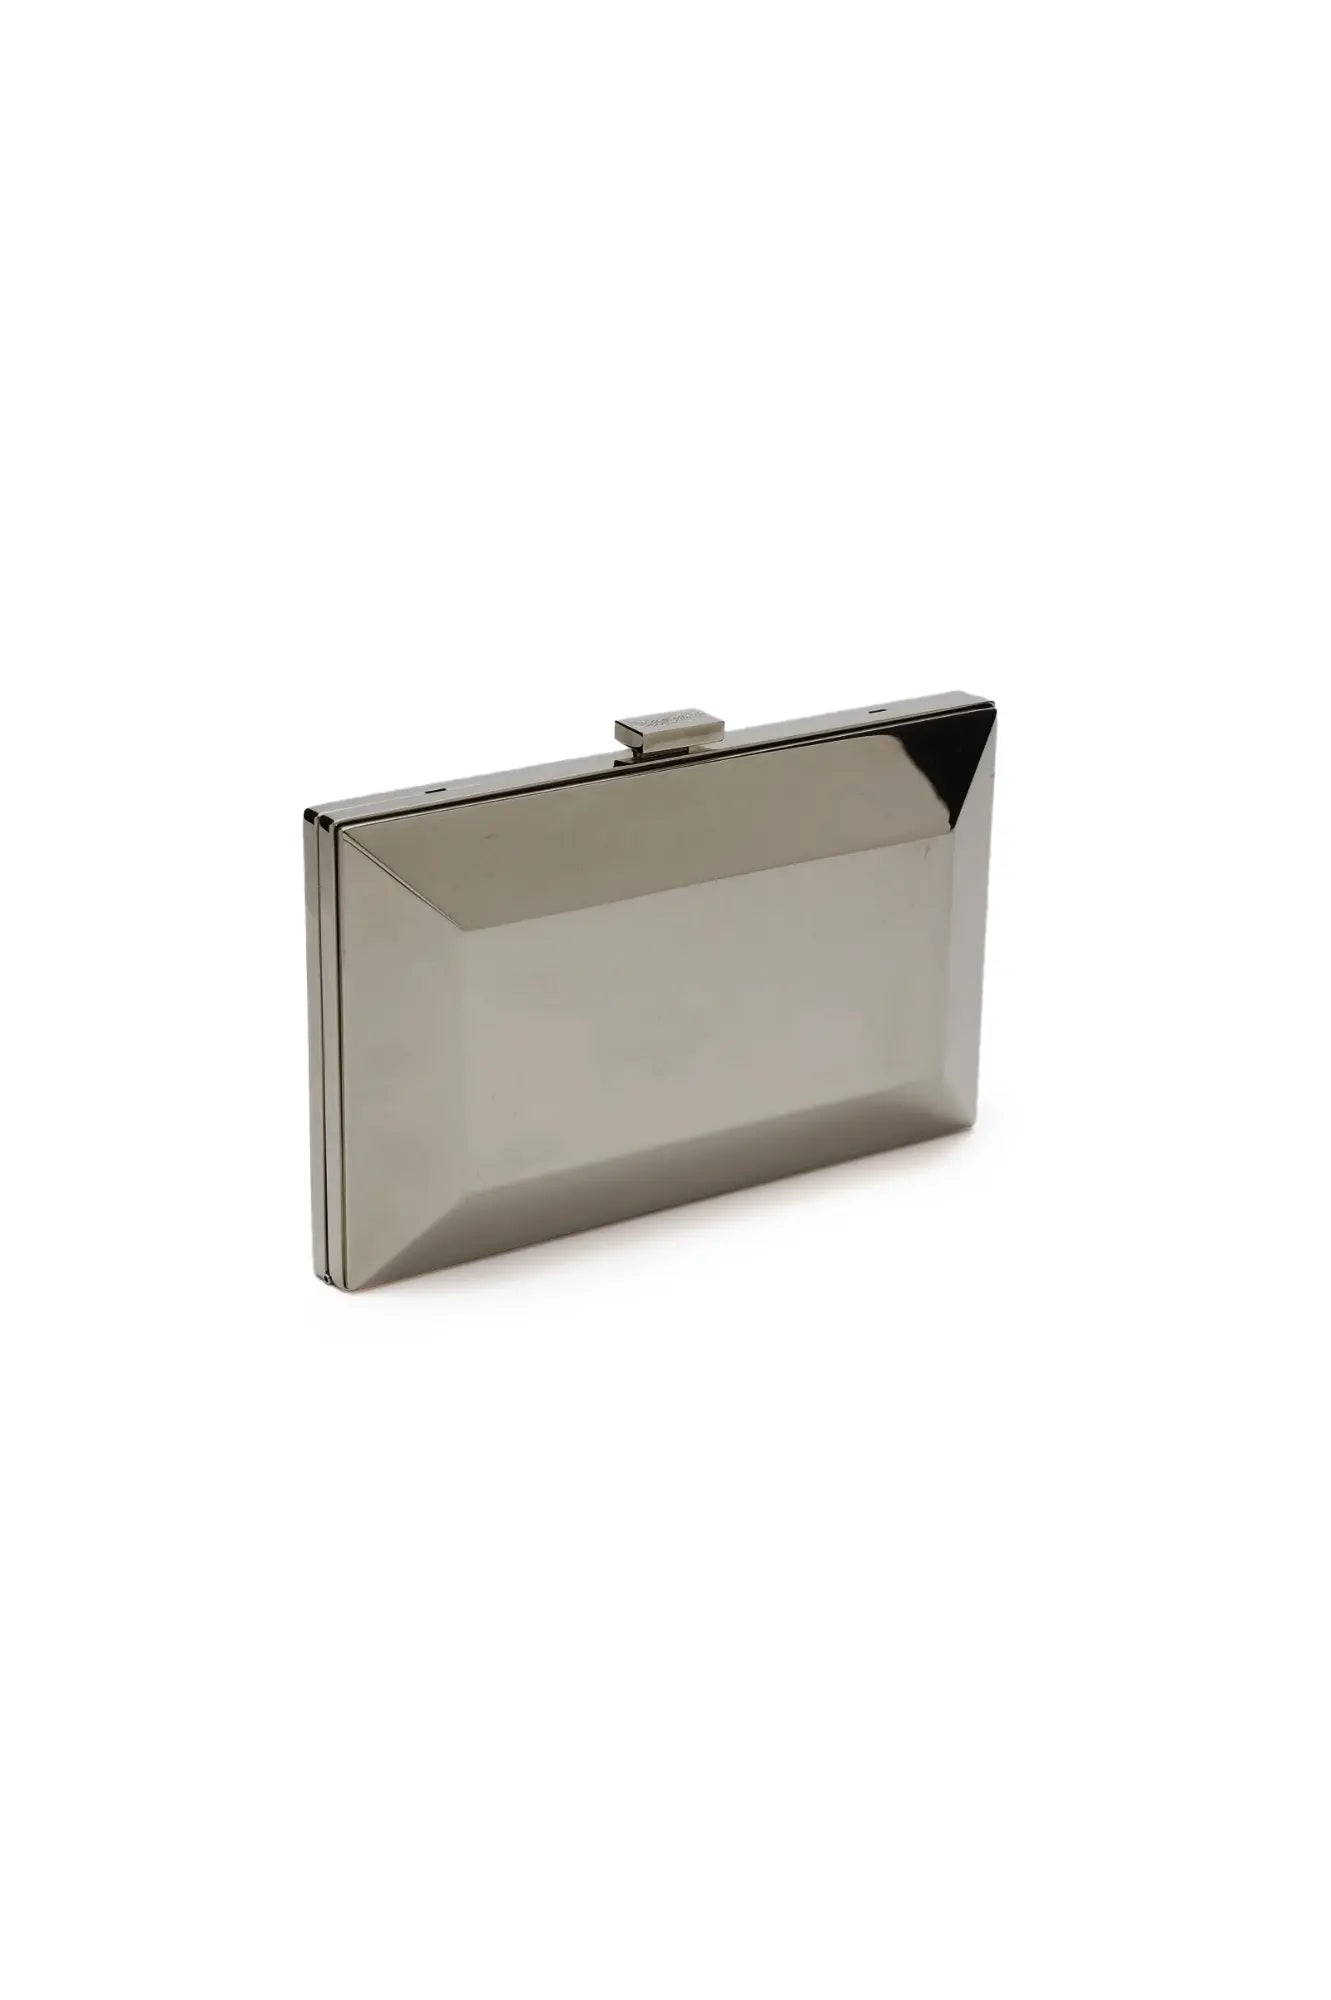 Silver Milan Clutch x MICAELA - Gunmetal Metallic purse with Italian craftsmanship on a white background from The Bella Rosa Collection.